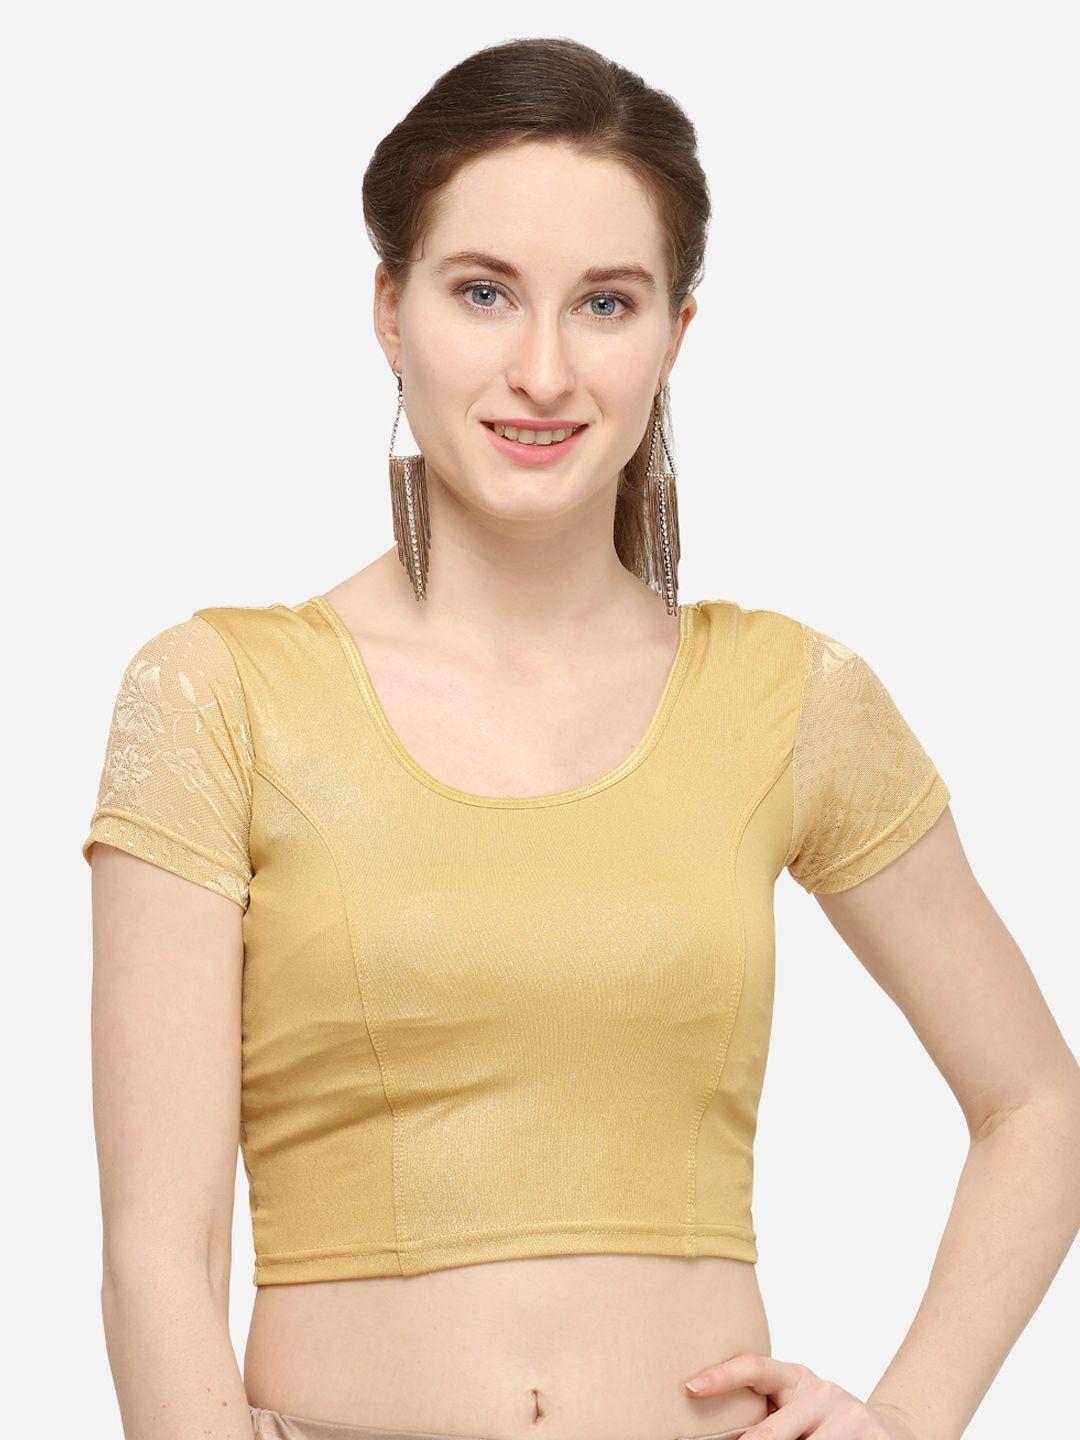 inddus women gold-toned solid saree blouse